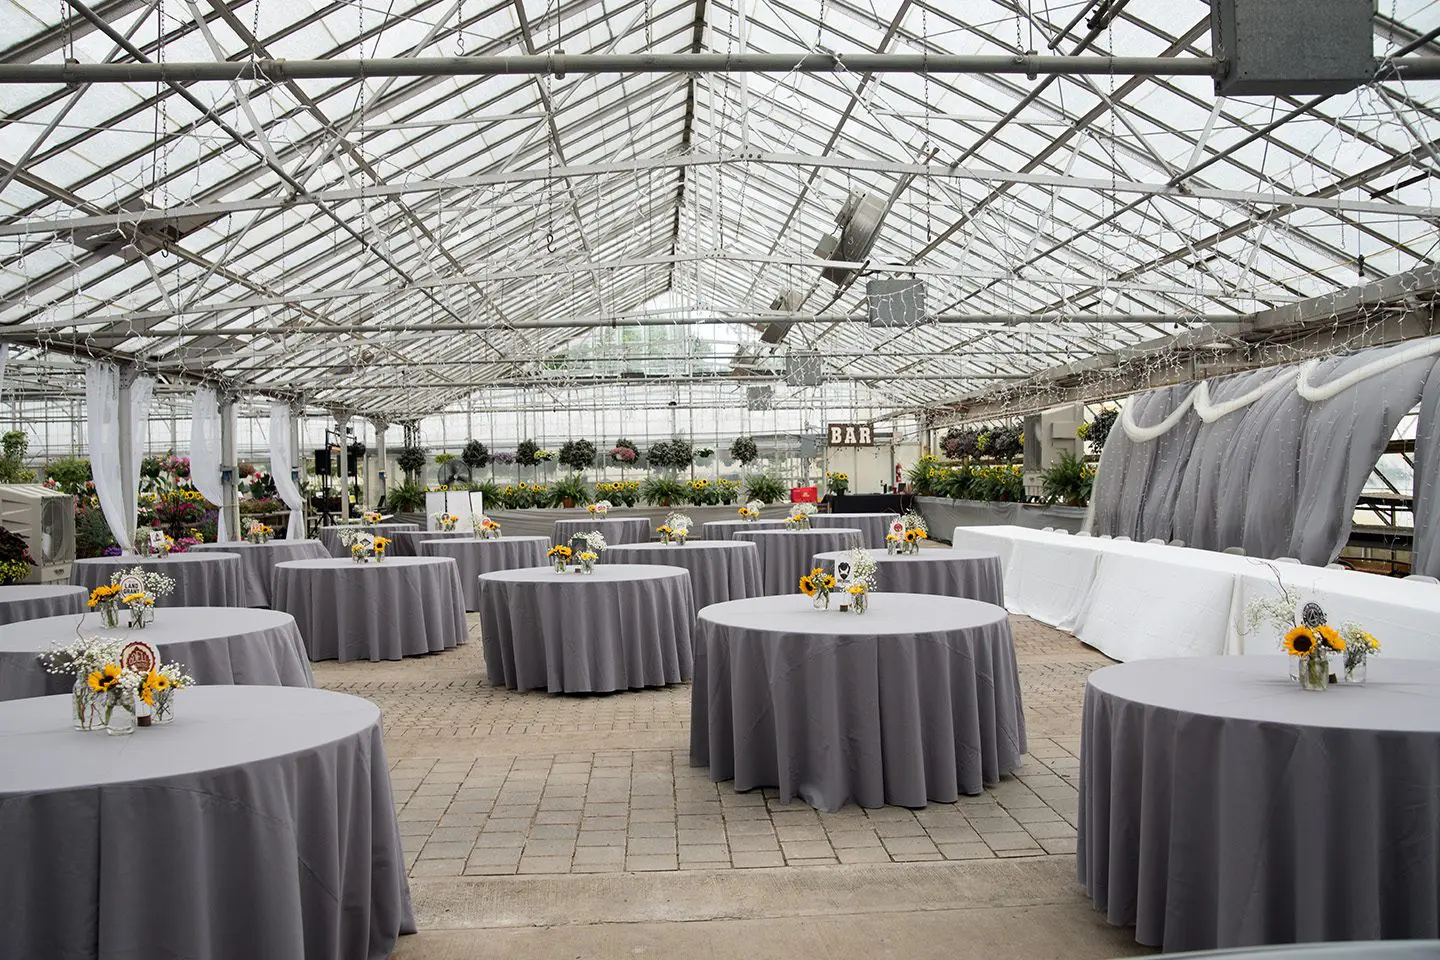 A well-arranged event space in a greenhouse, featuring round tables with gray cloths and floral centerpieces, and draped white fabric along the walls.